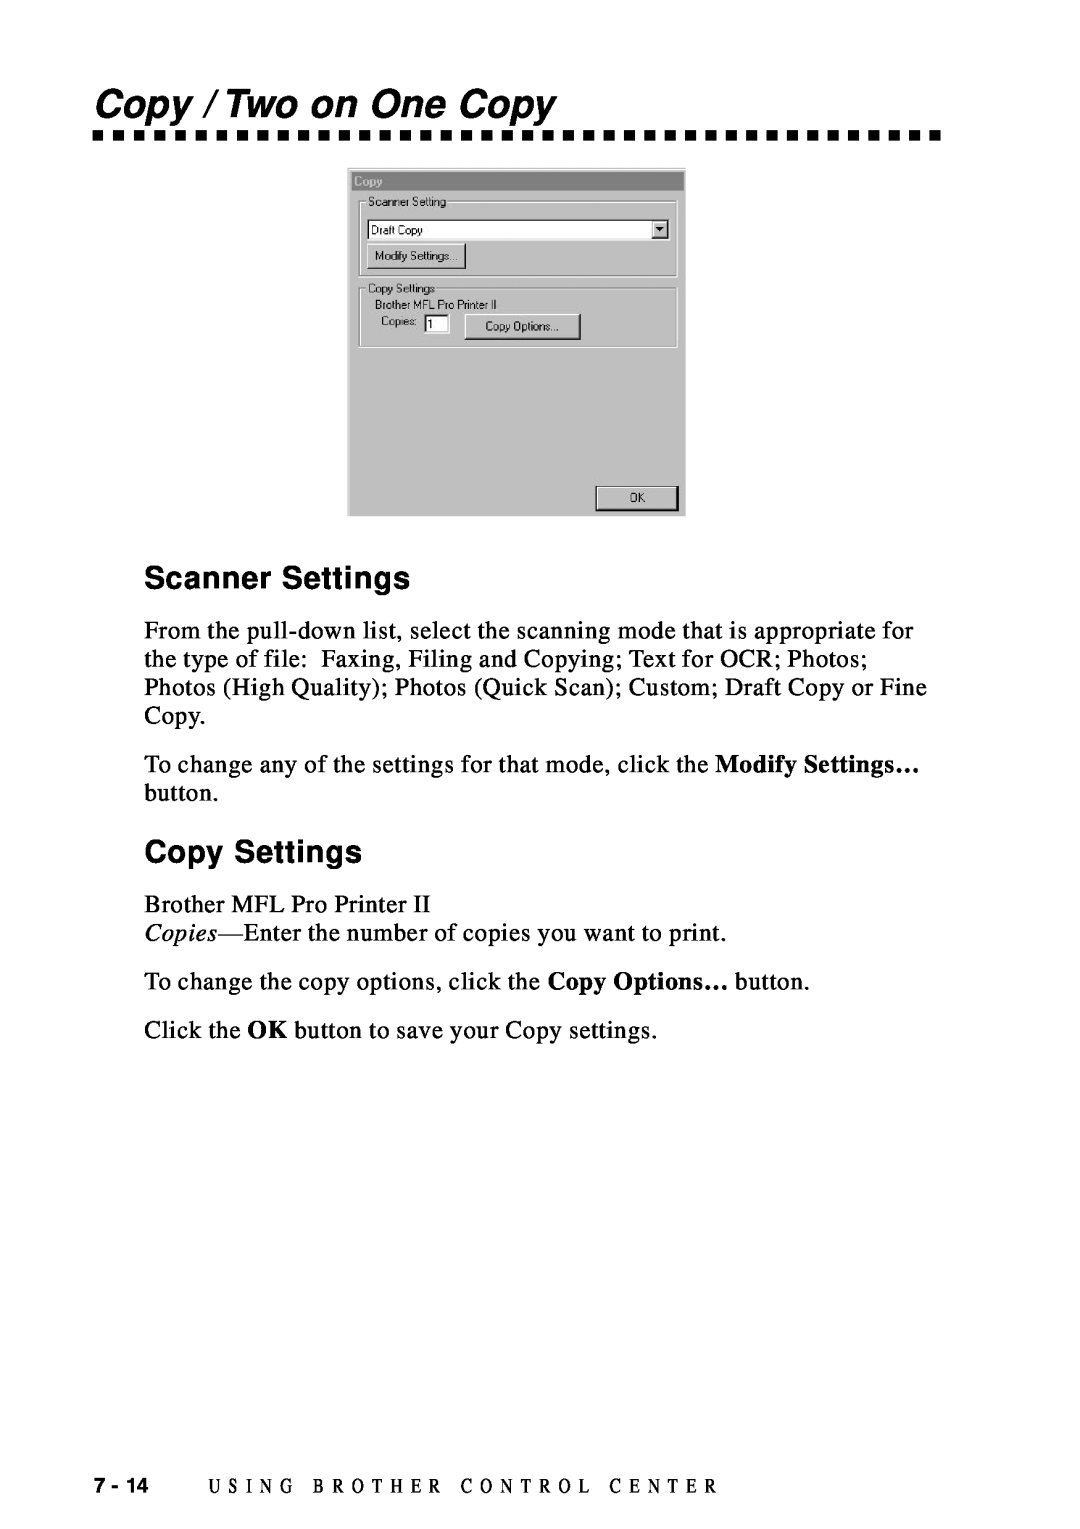 Brother DCP1200 manual Copy / Two on One Copy, Copy Settings, Scanner Settings 